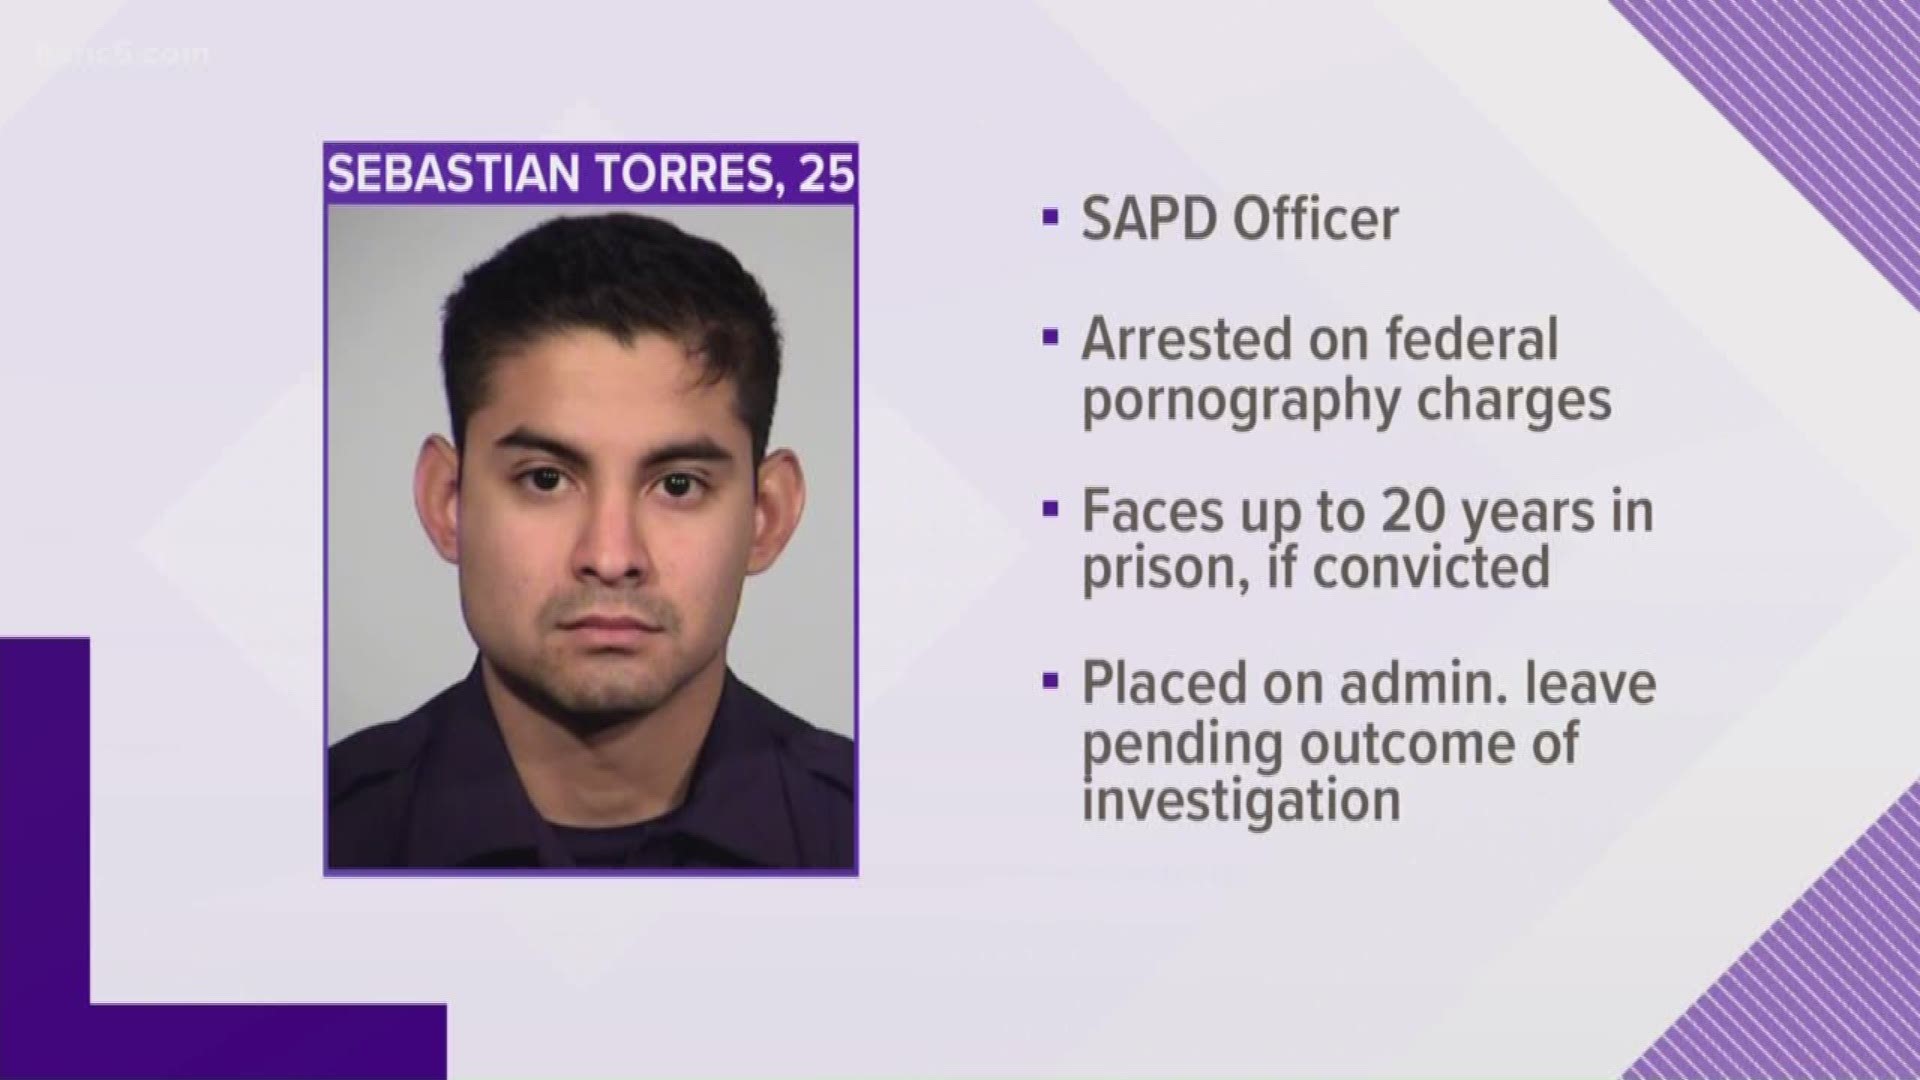 Authorities say the 25-year-old suspect is a two-year veteran of SAPD, and faces up to 20 years in prison if convicted.